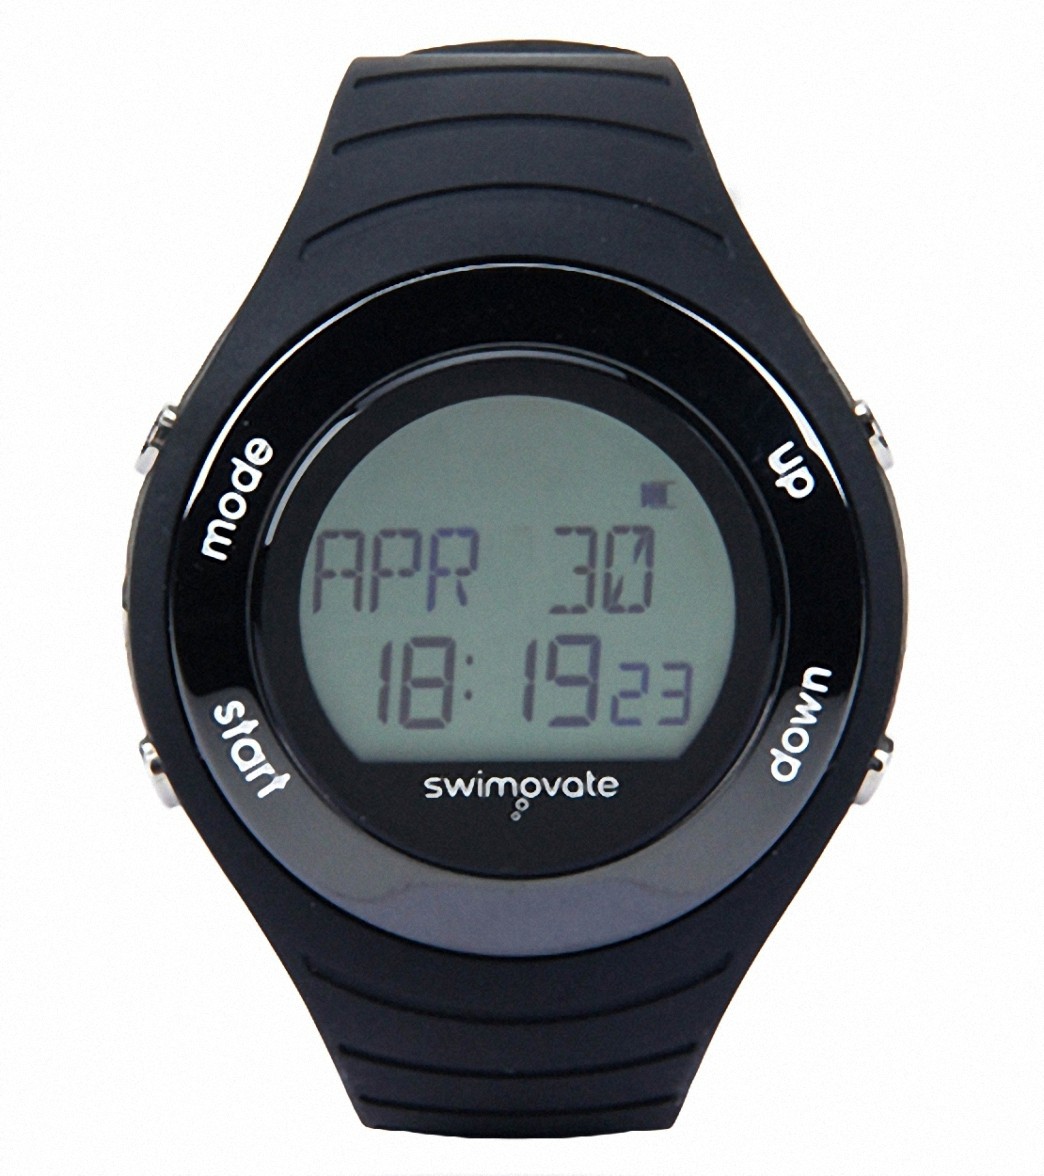 Swimovate Poolmate HR Swim Watch at SwimOutlet.com - Free Shipping